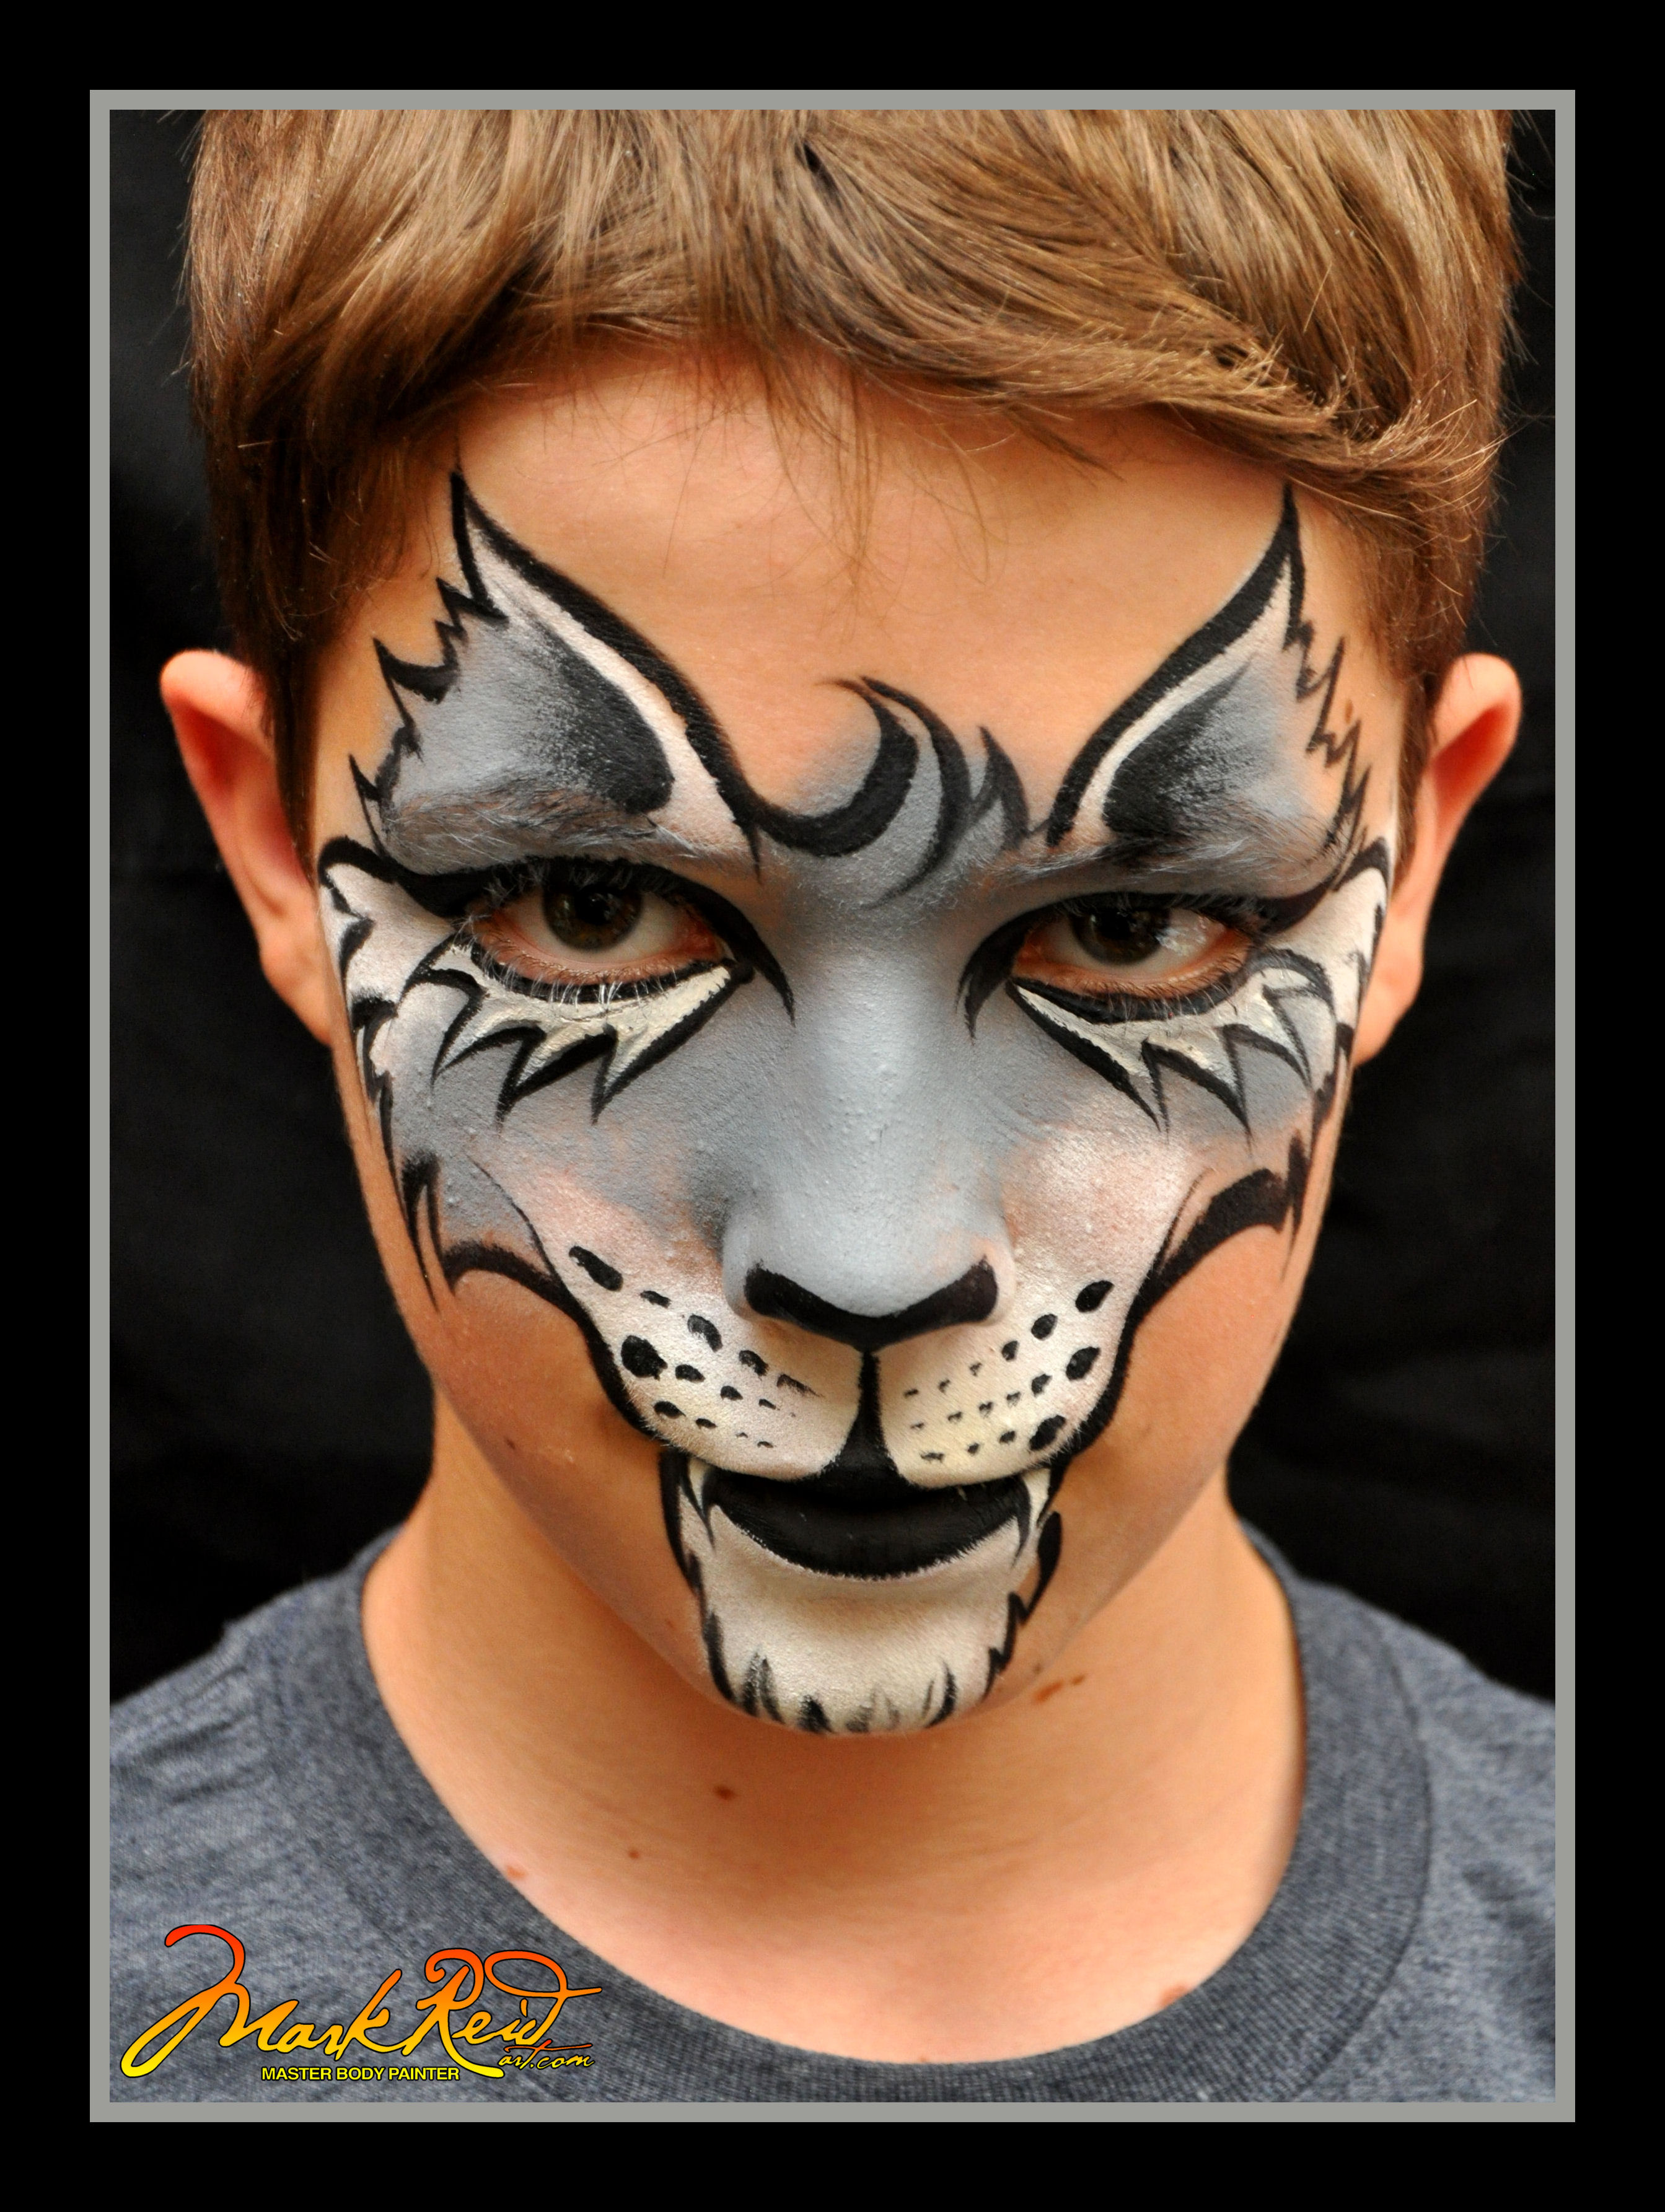 Young boy with a face painting of a mask on his face that looks like a cat on his nose and mouth with stylized lashes around his eyes